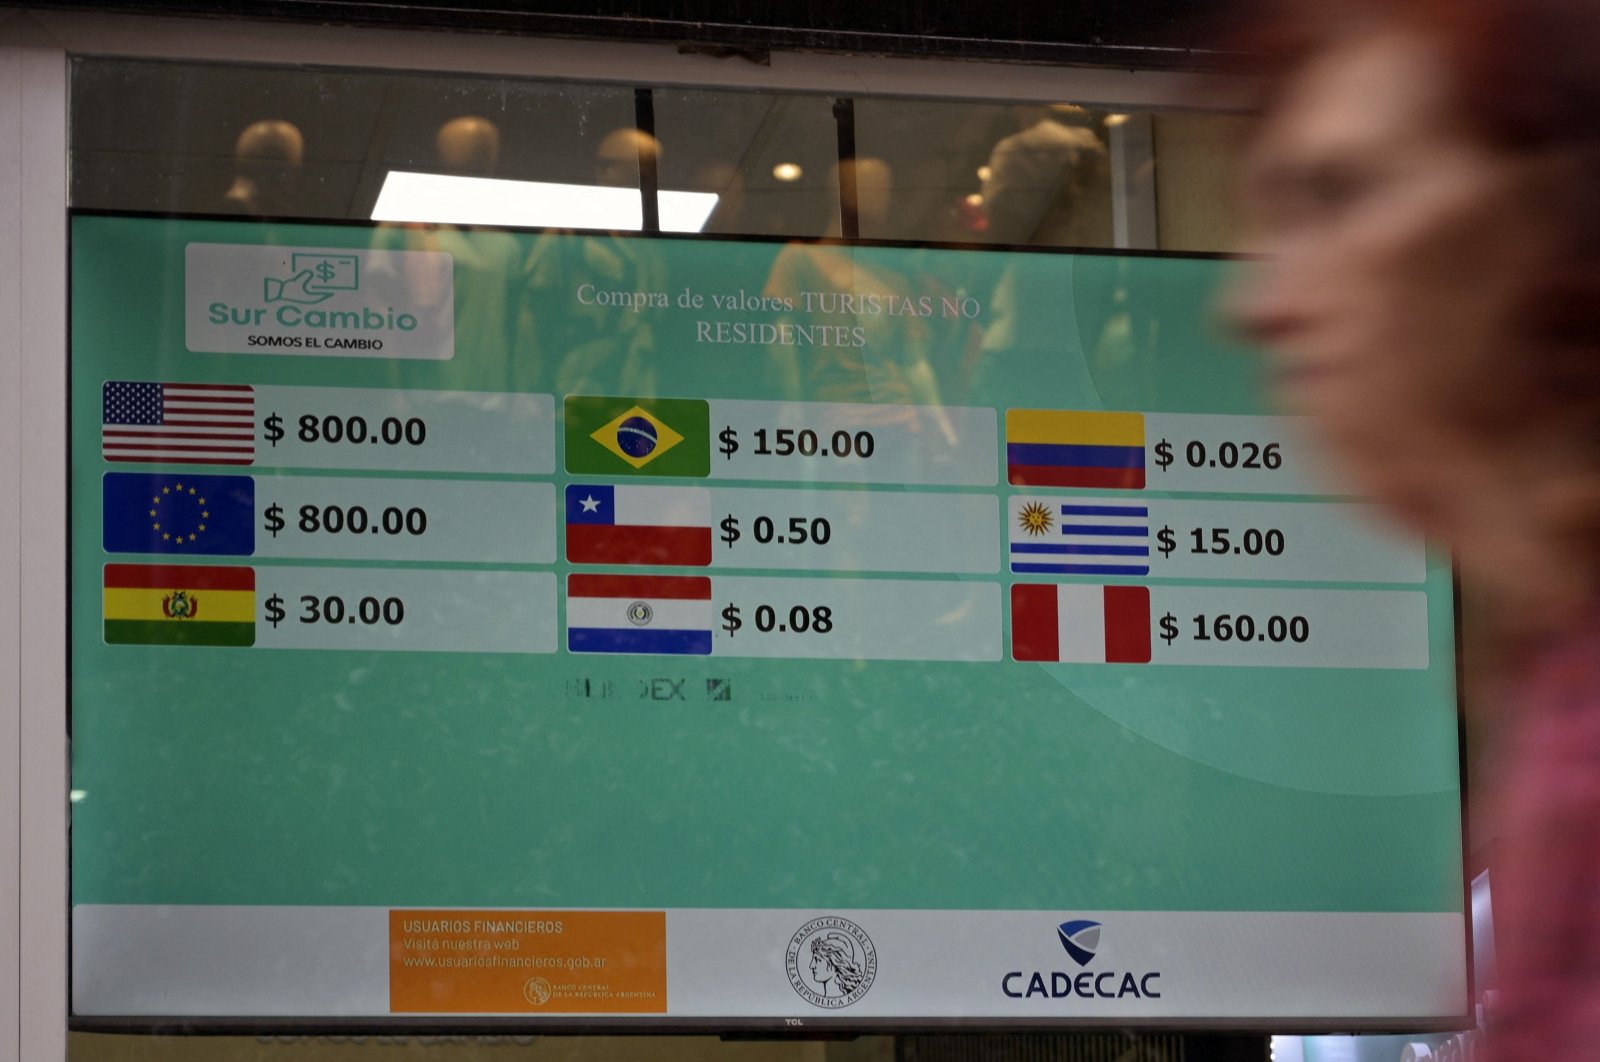 A woman walks by a currency exchange office displaying a screen with the exchange rate for U.S. dollars, euros, and other Latin American currencies in Argentine pesos, in Buenos Aires, Argentina, Nov. 21, 2023. (AFP Photo)